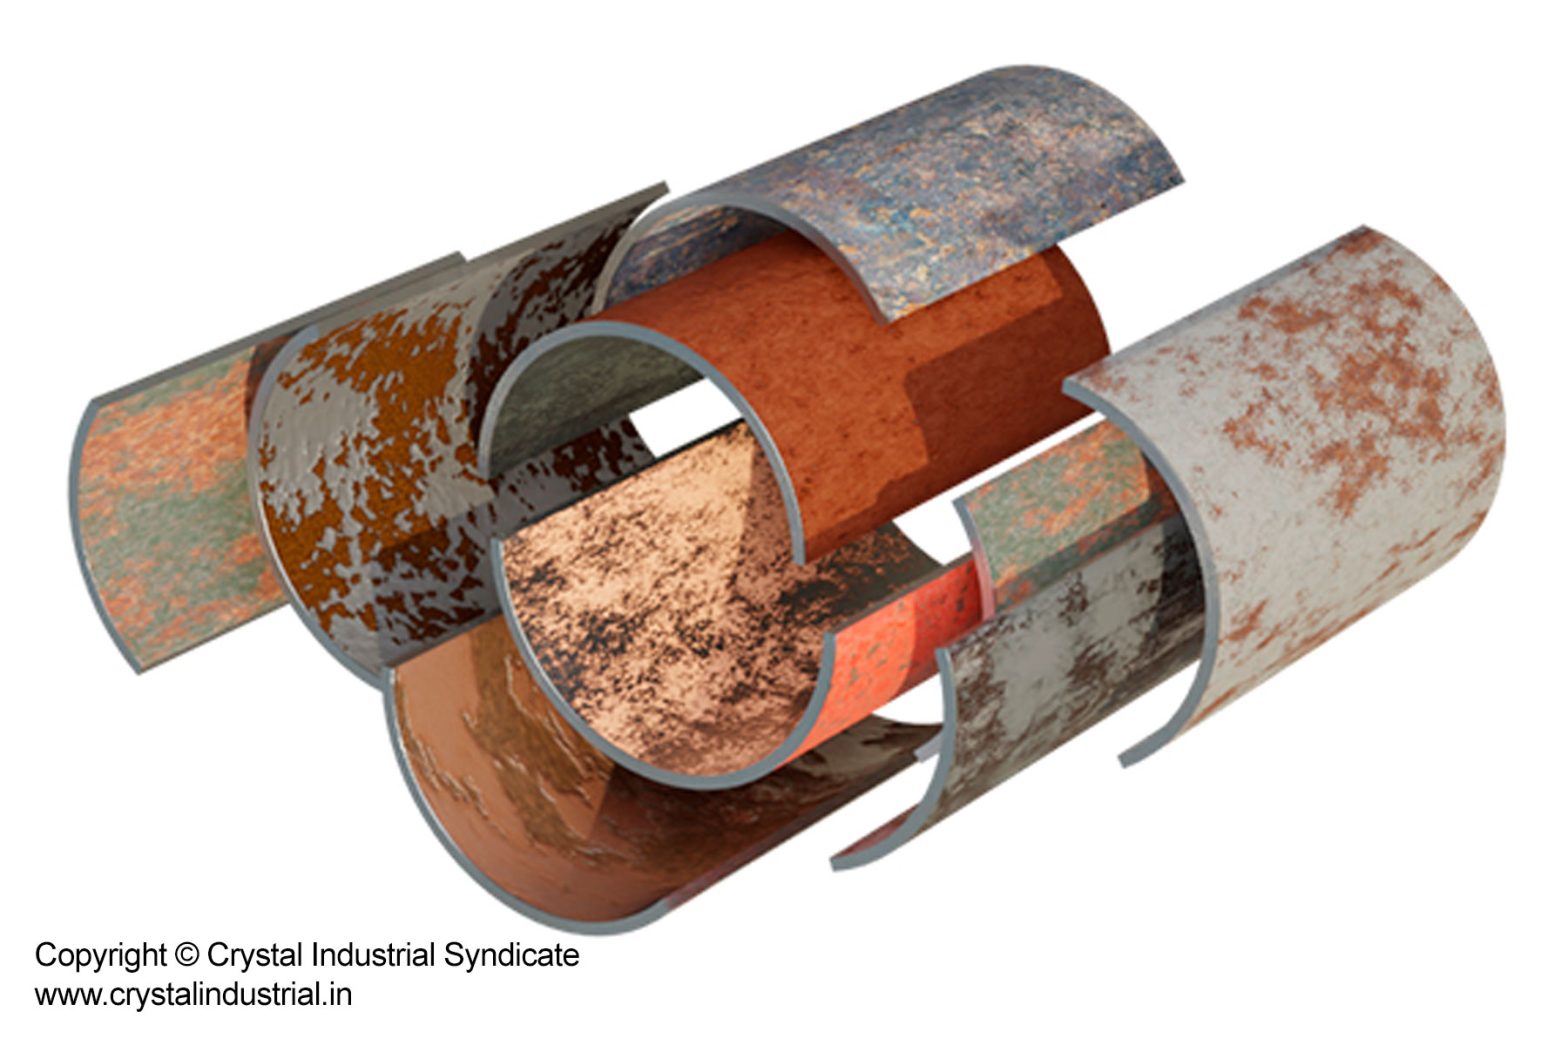 Protecting gas pipelines from corrosion